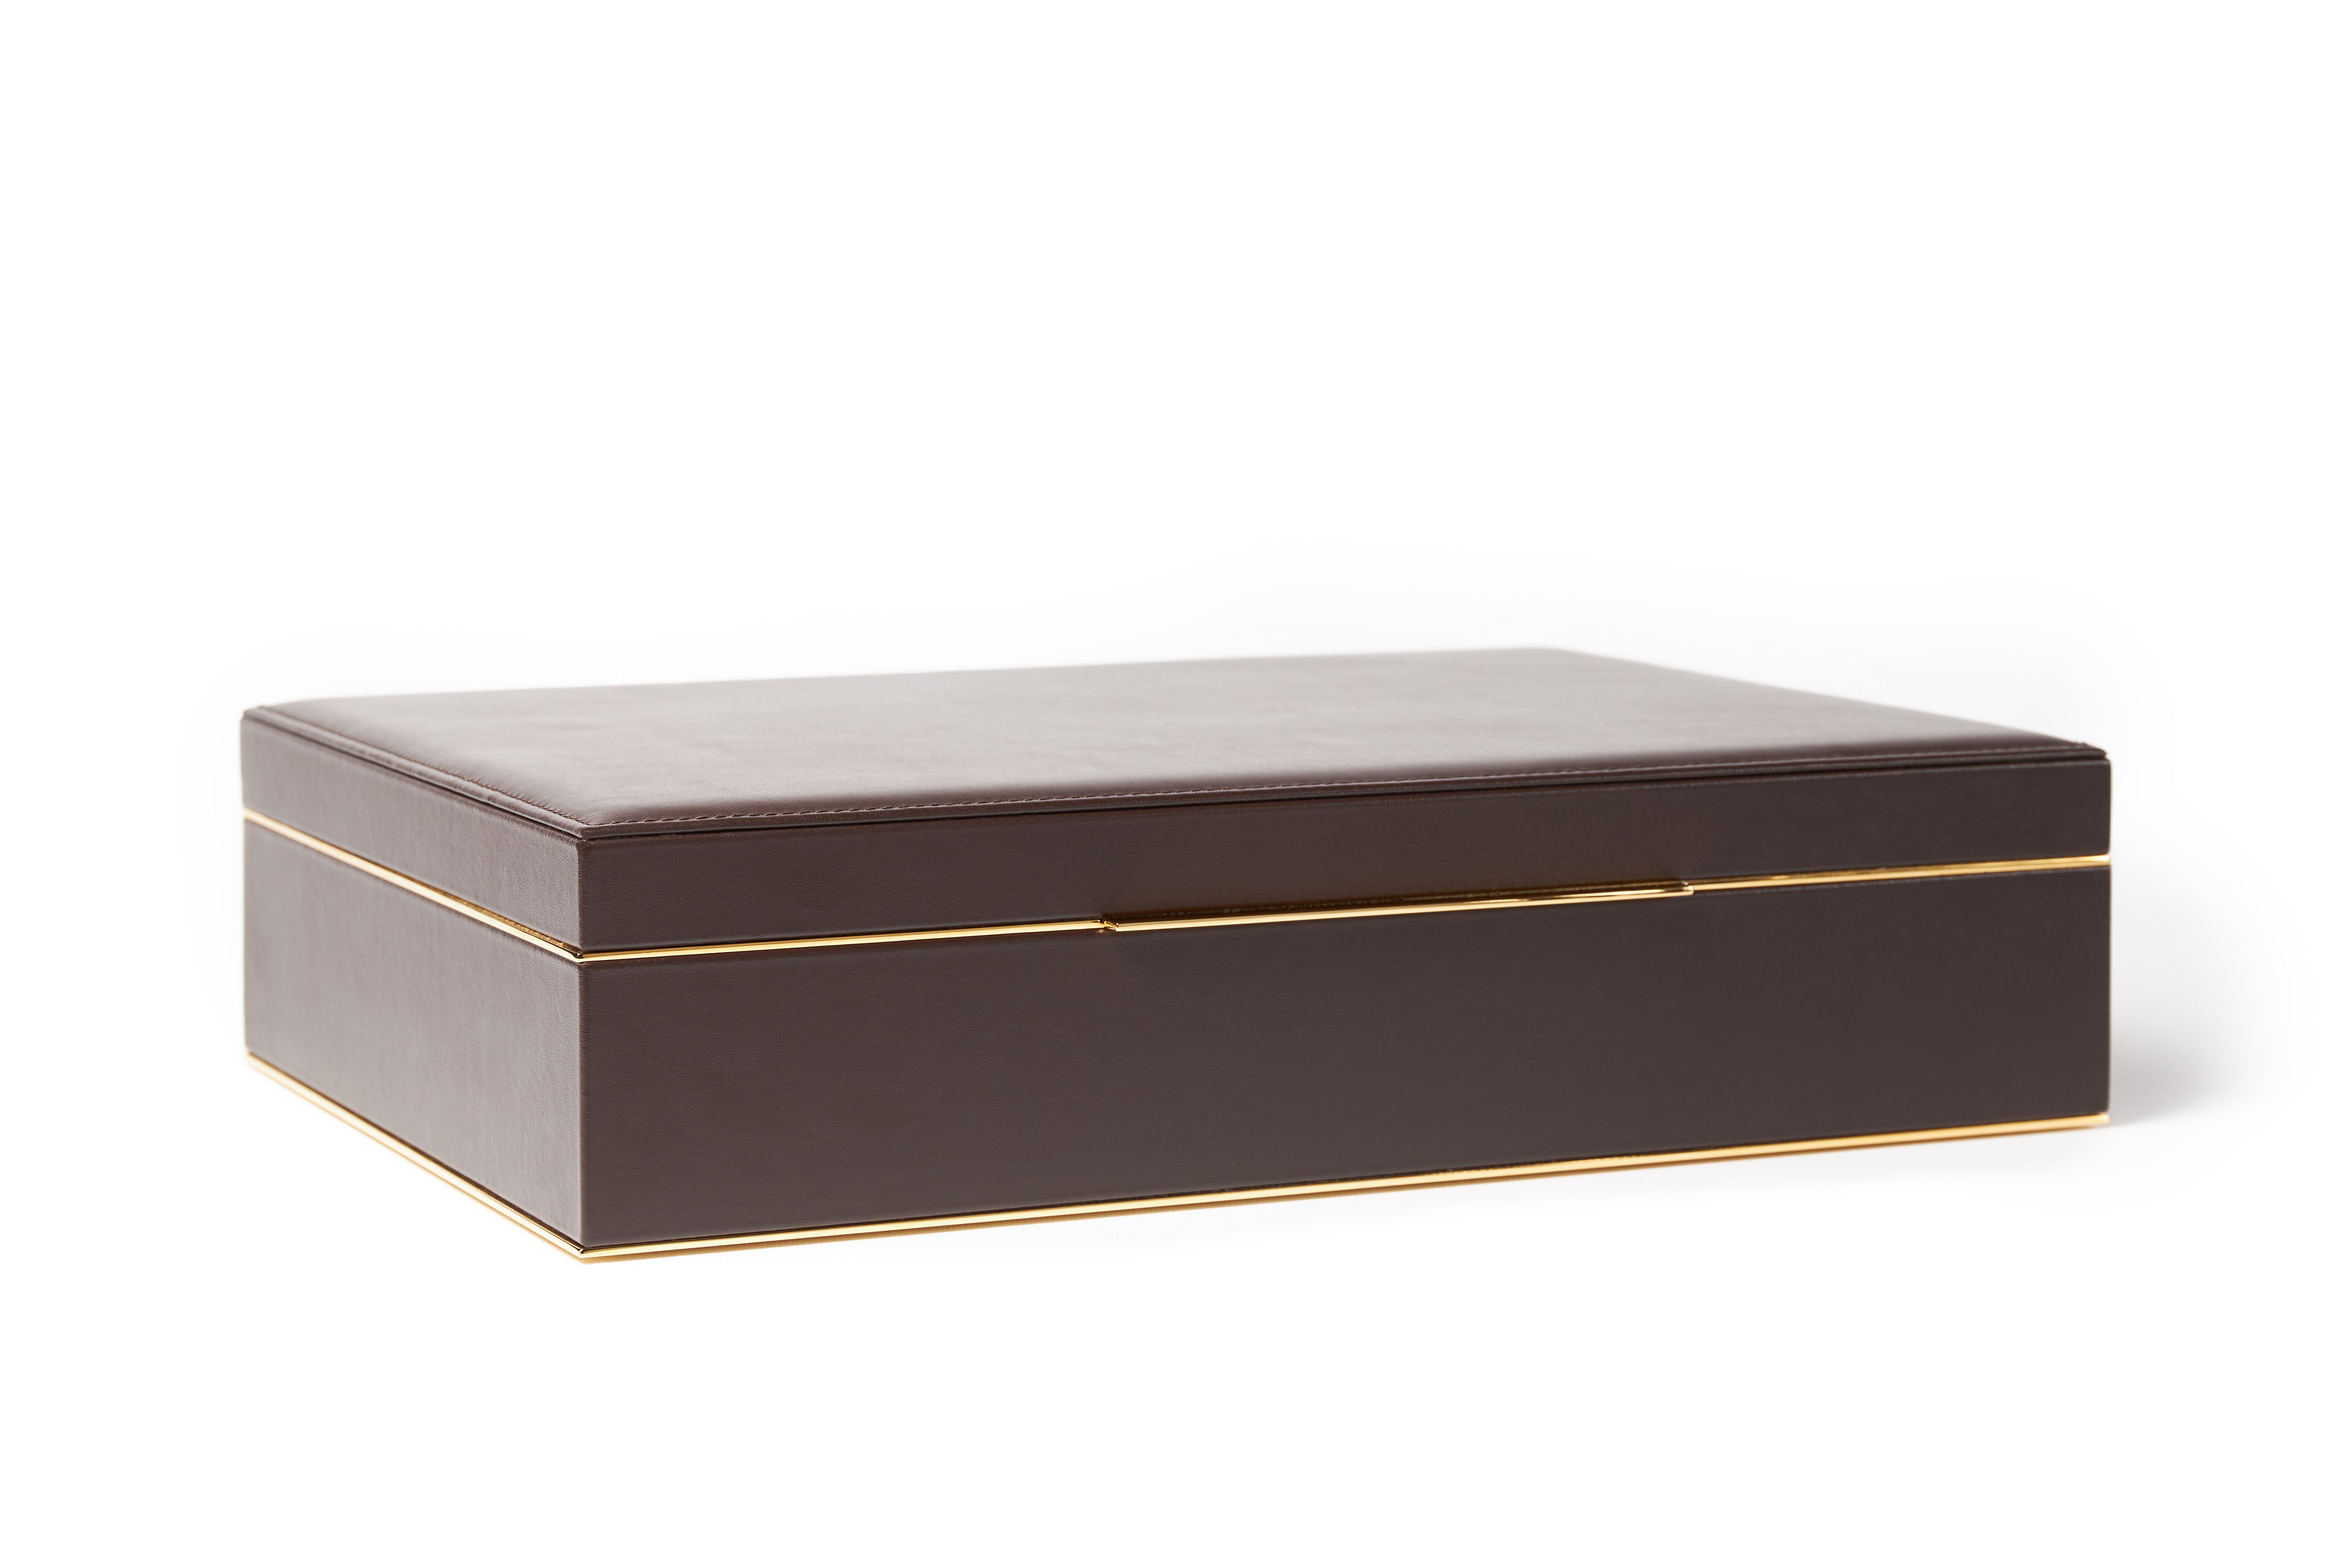 Bernardini Milano Watch Holder - Deep Brown leather and Sand alcantara with yellow gold plated details - closed